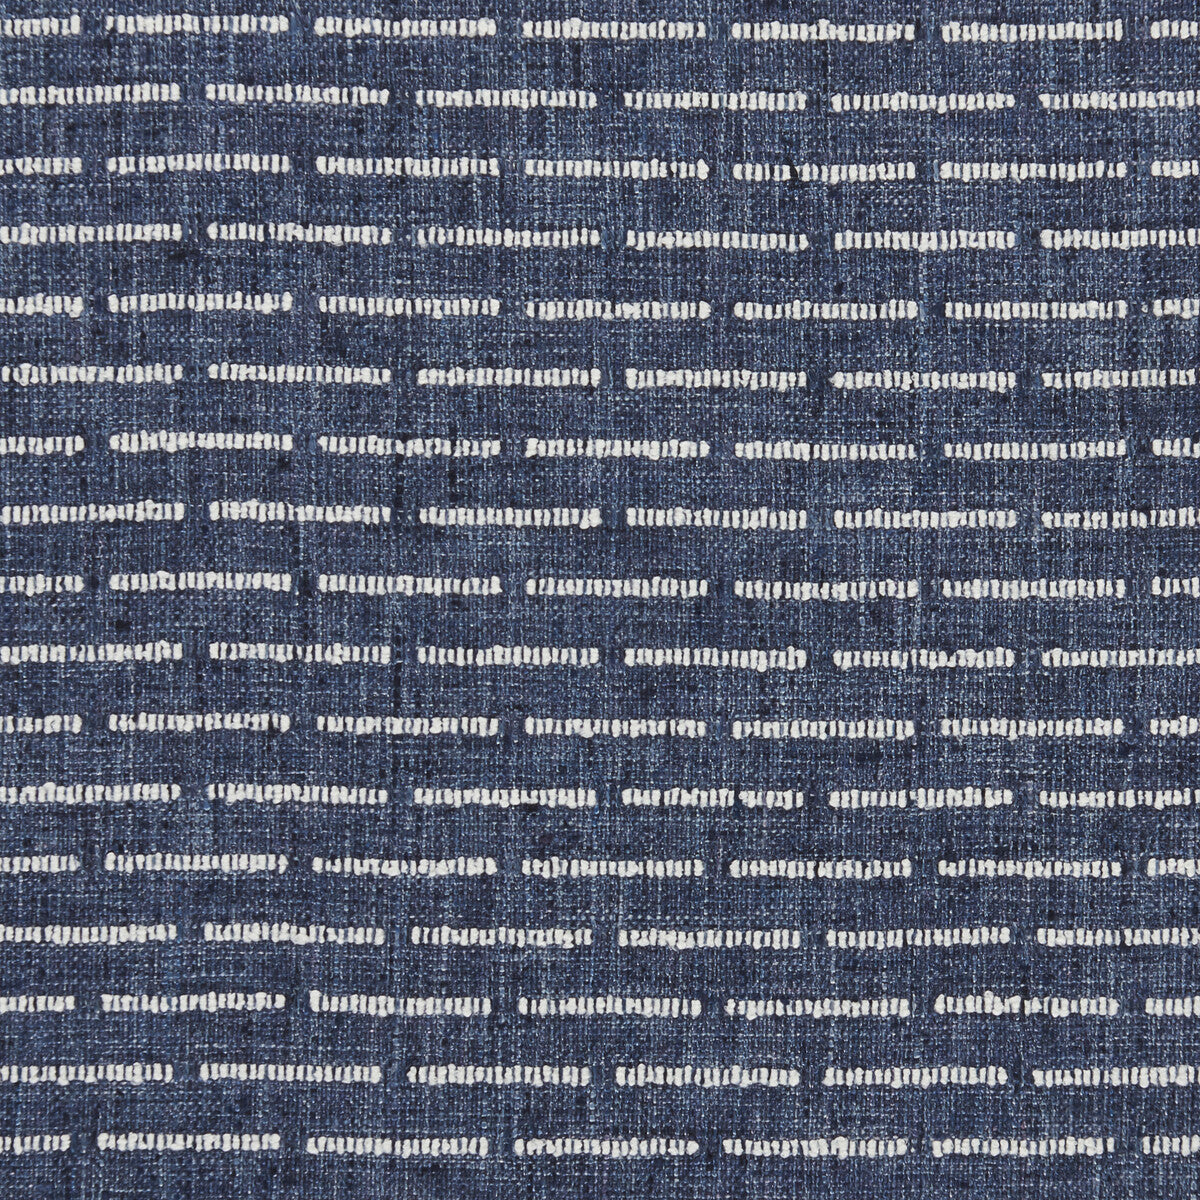 Kravet Basics fabric in 36528-505 color - pattern 36528.505.0 - by Kravet Basics in the Bungalow Chic II collection